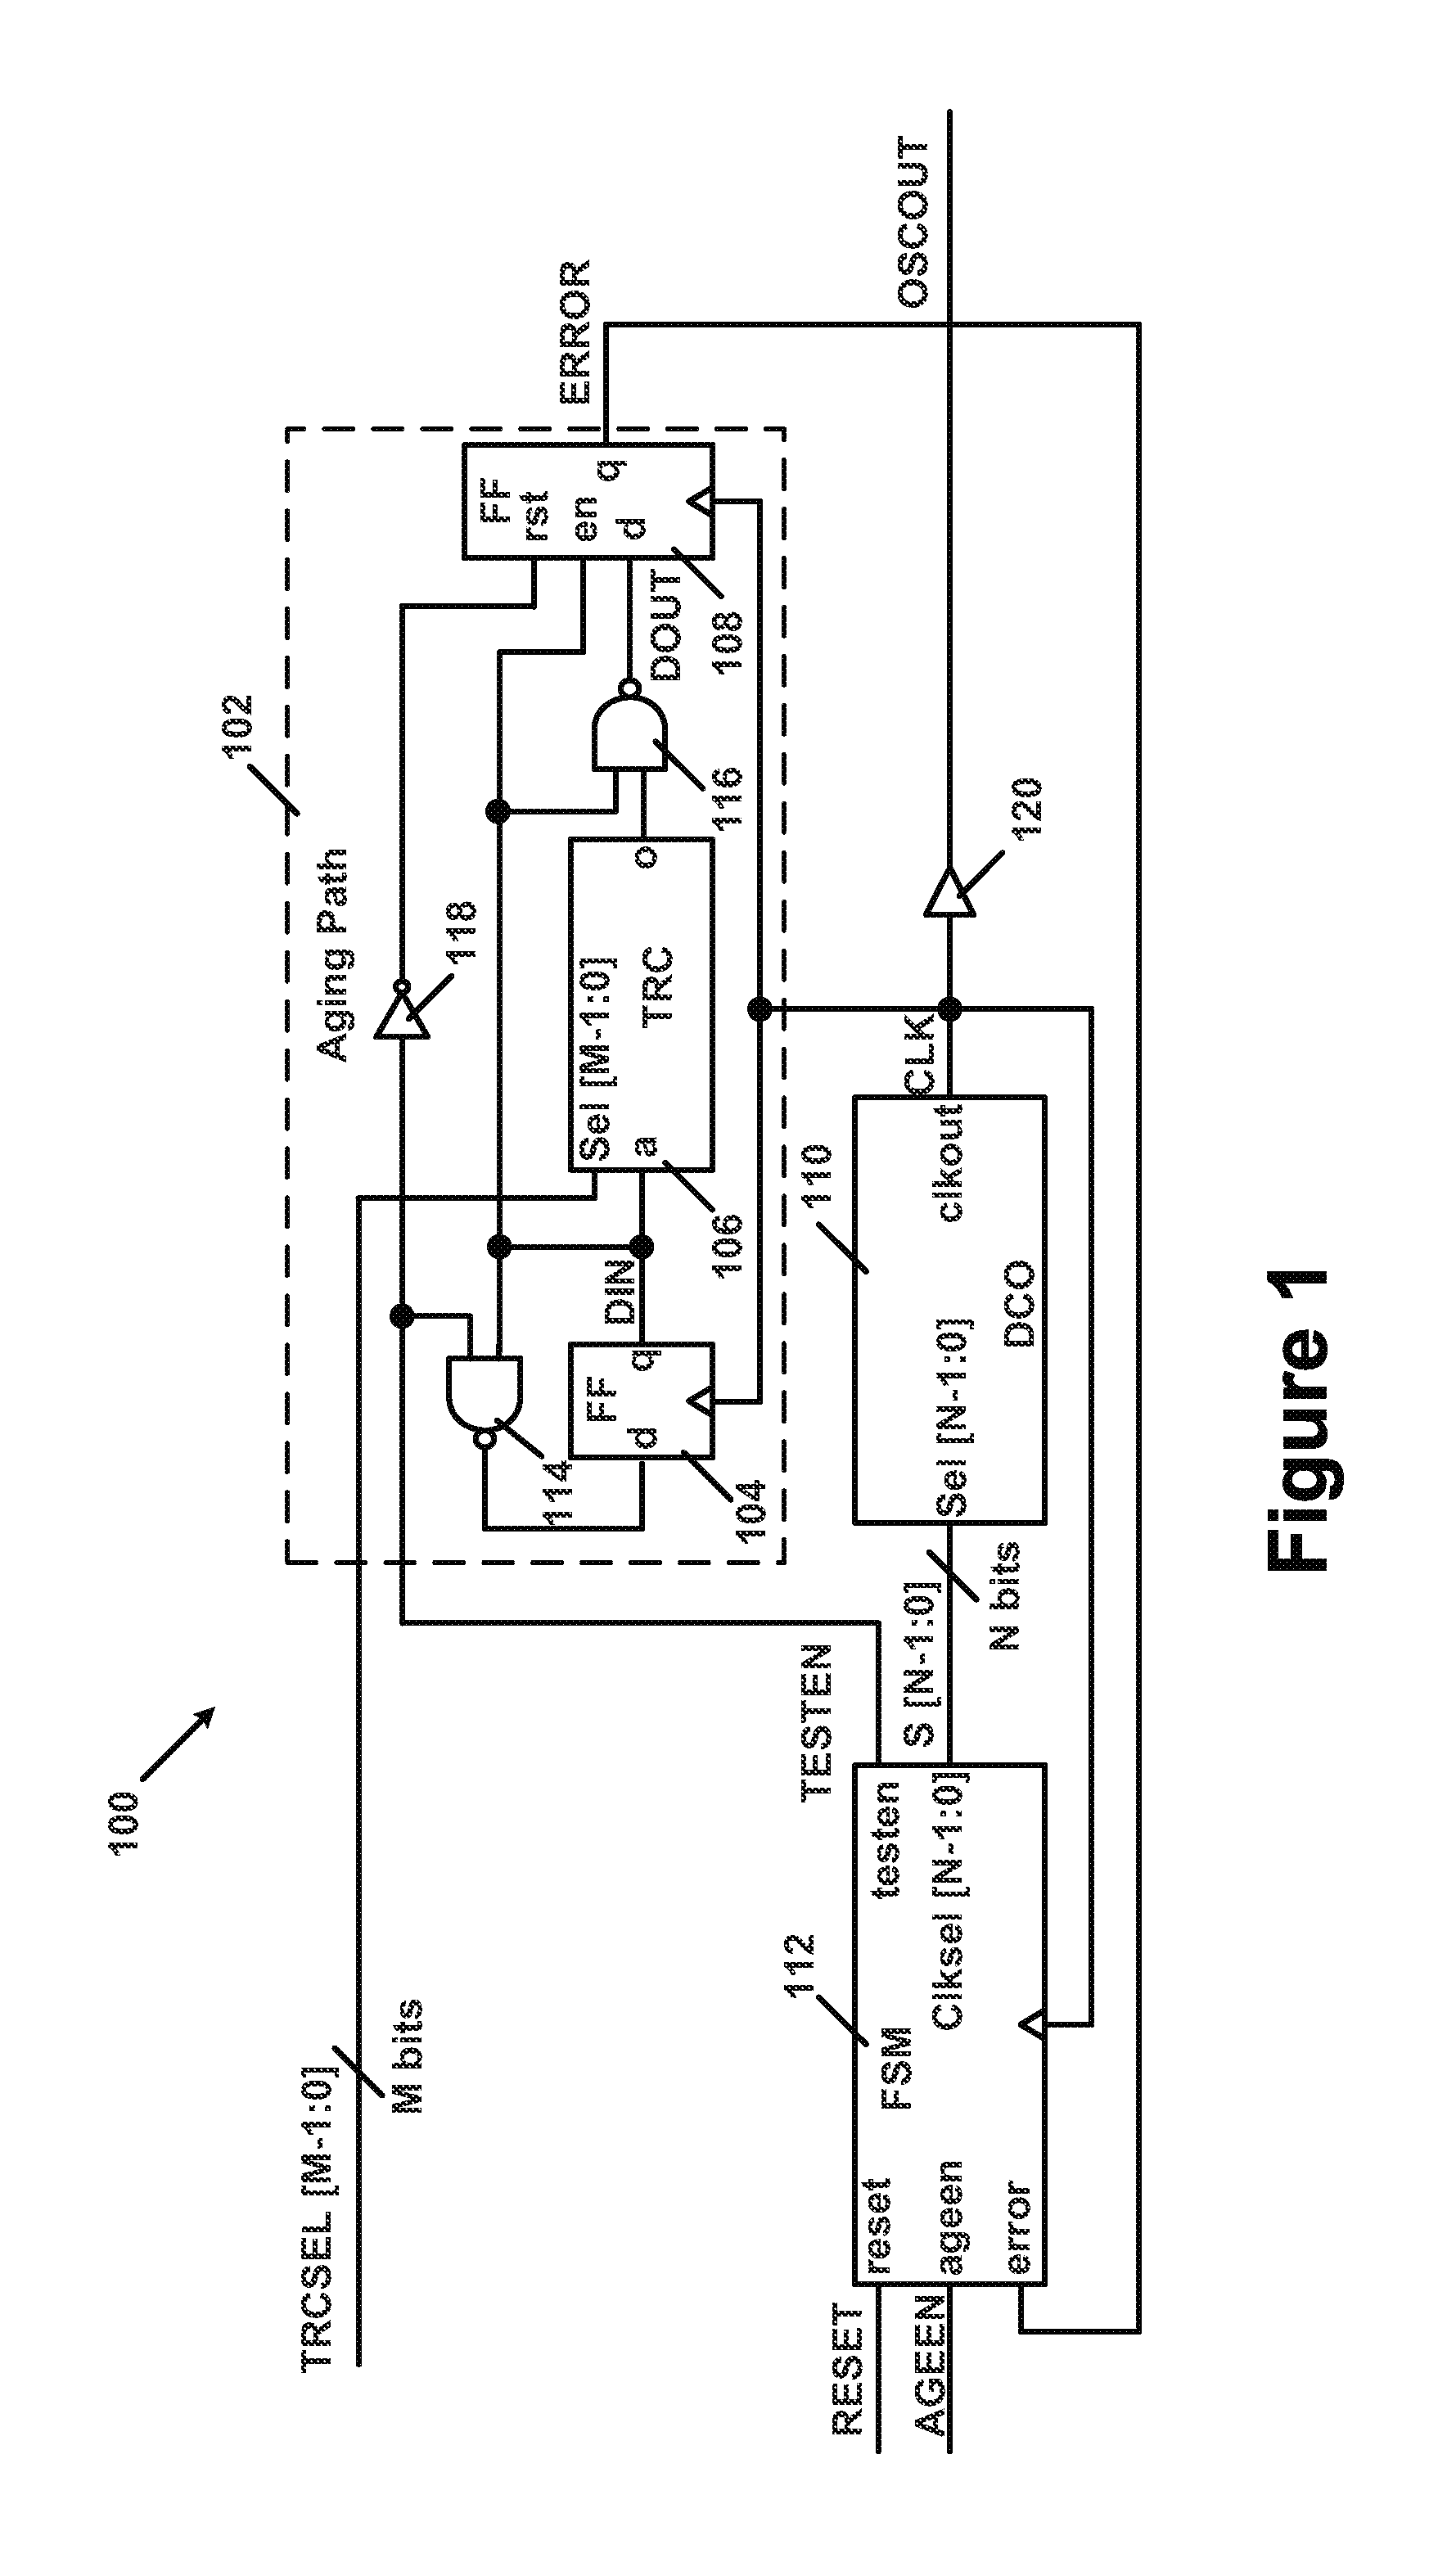 Self-contained, path-level aging monitor apparatus and method